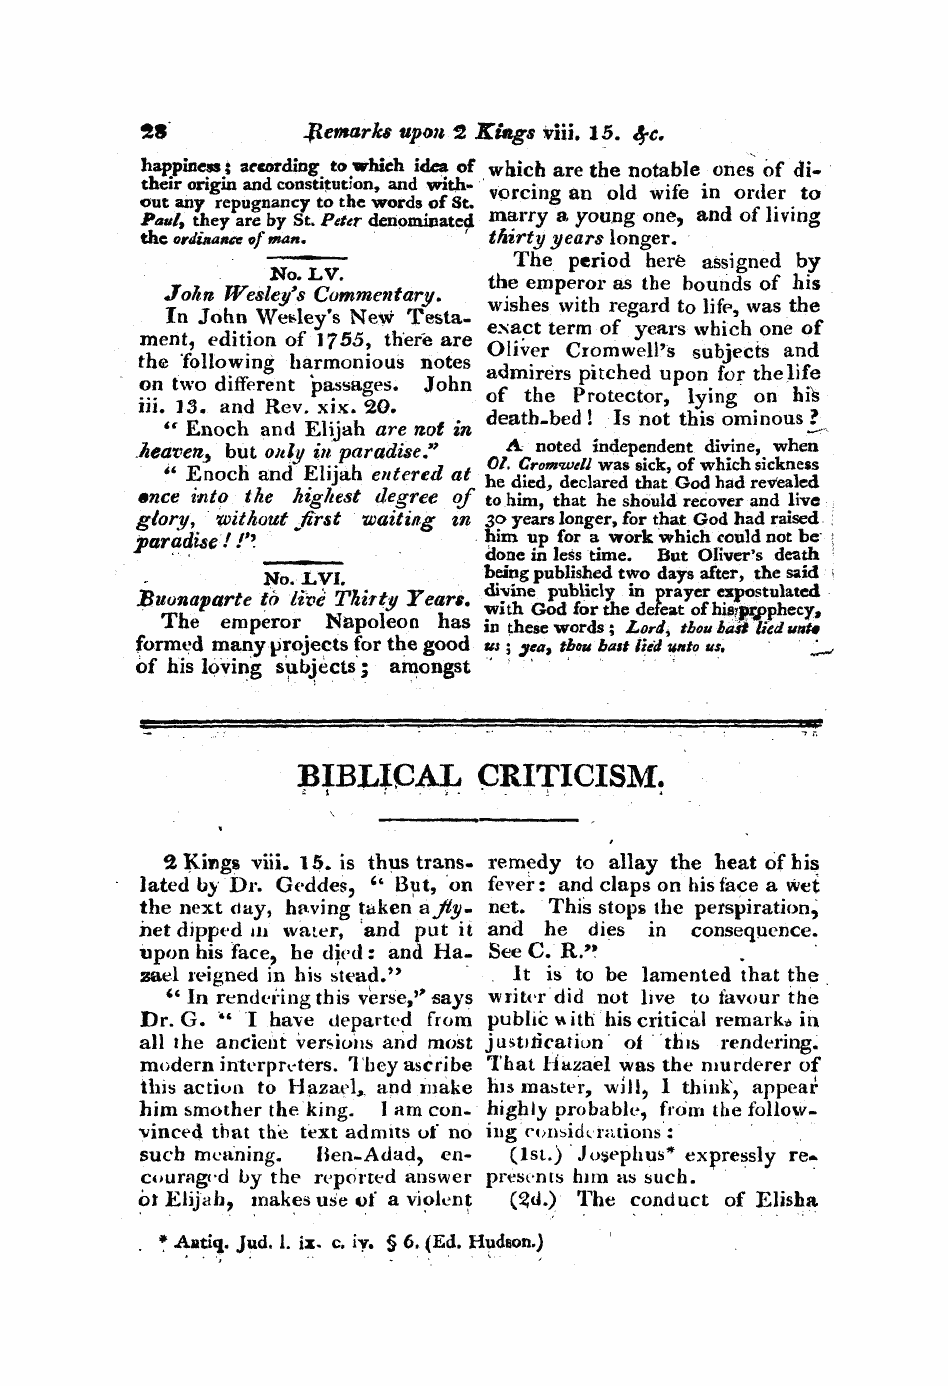 Monthly Repository (1806-1838) and Unitarian Chronicle (1832-1833): F Y, 1st edition - Biblical Criticism. - 1 * ¦ ¦ ' I - ¦ . \ I . •»